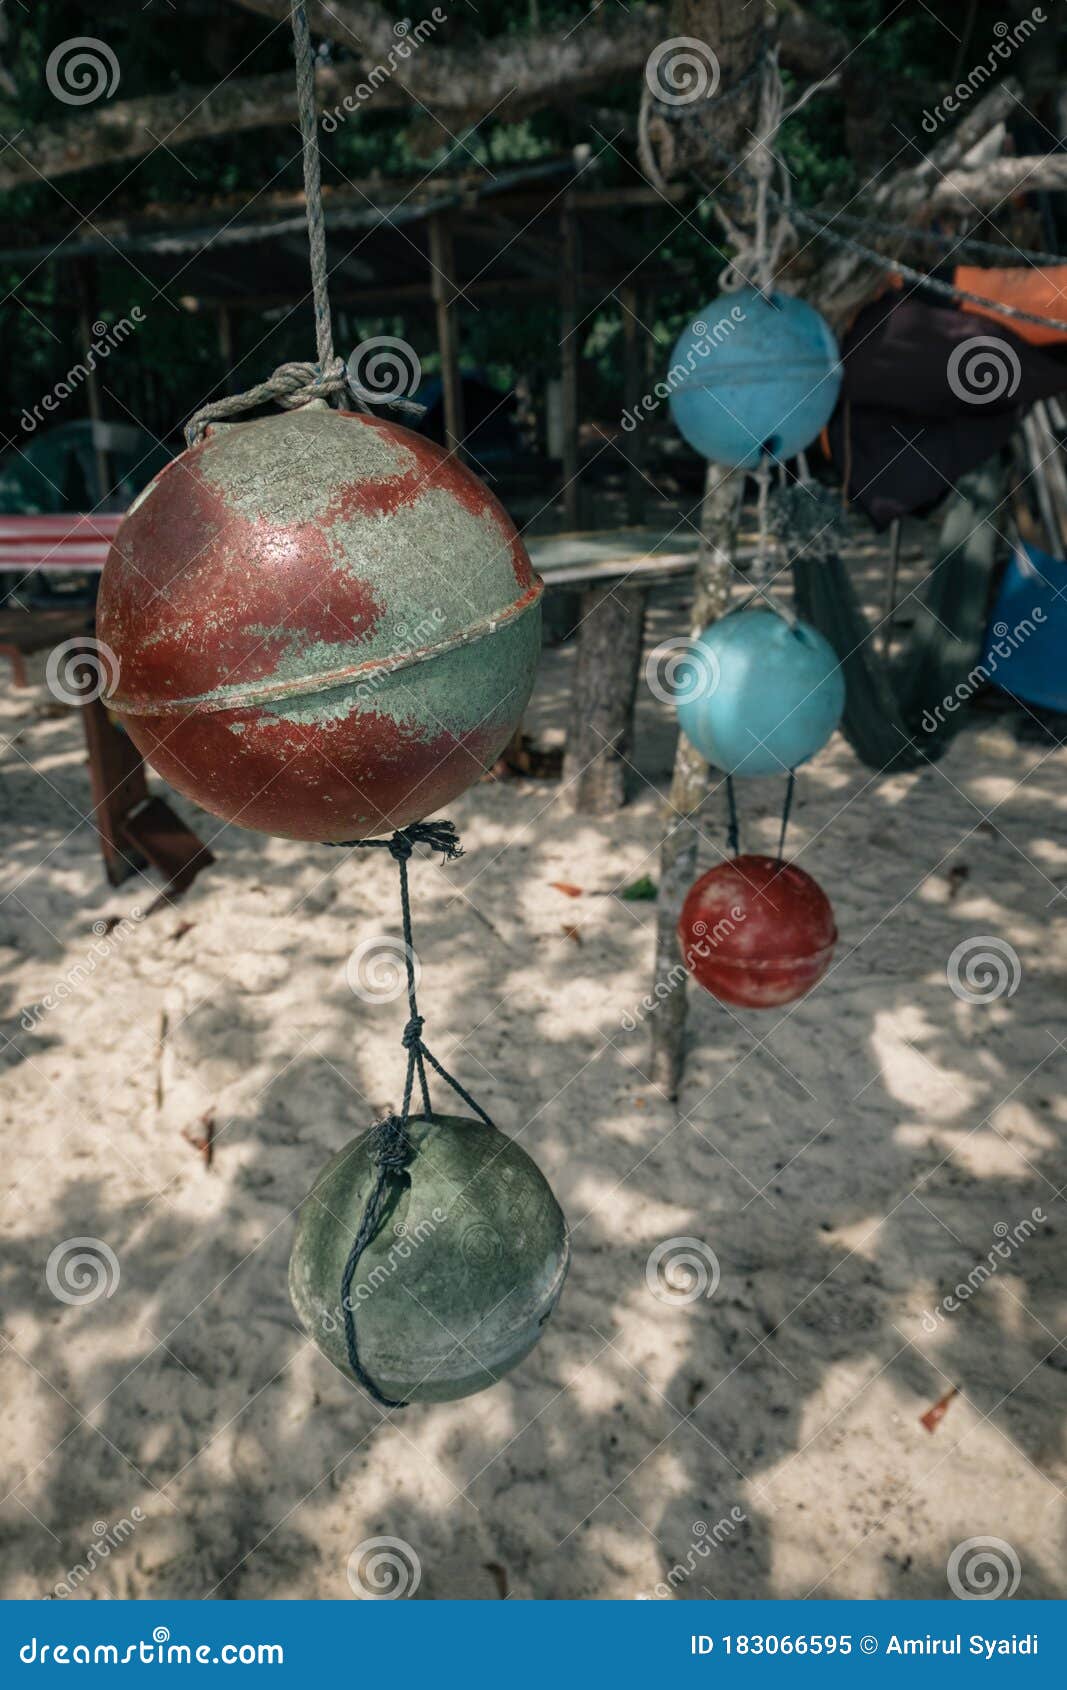 https://thumbs.dreamstime.com/z/small-foam-ball-buoy-fishing-net-float-hanging-tree-under-bright-sunny-day-background-183066595.jpg